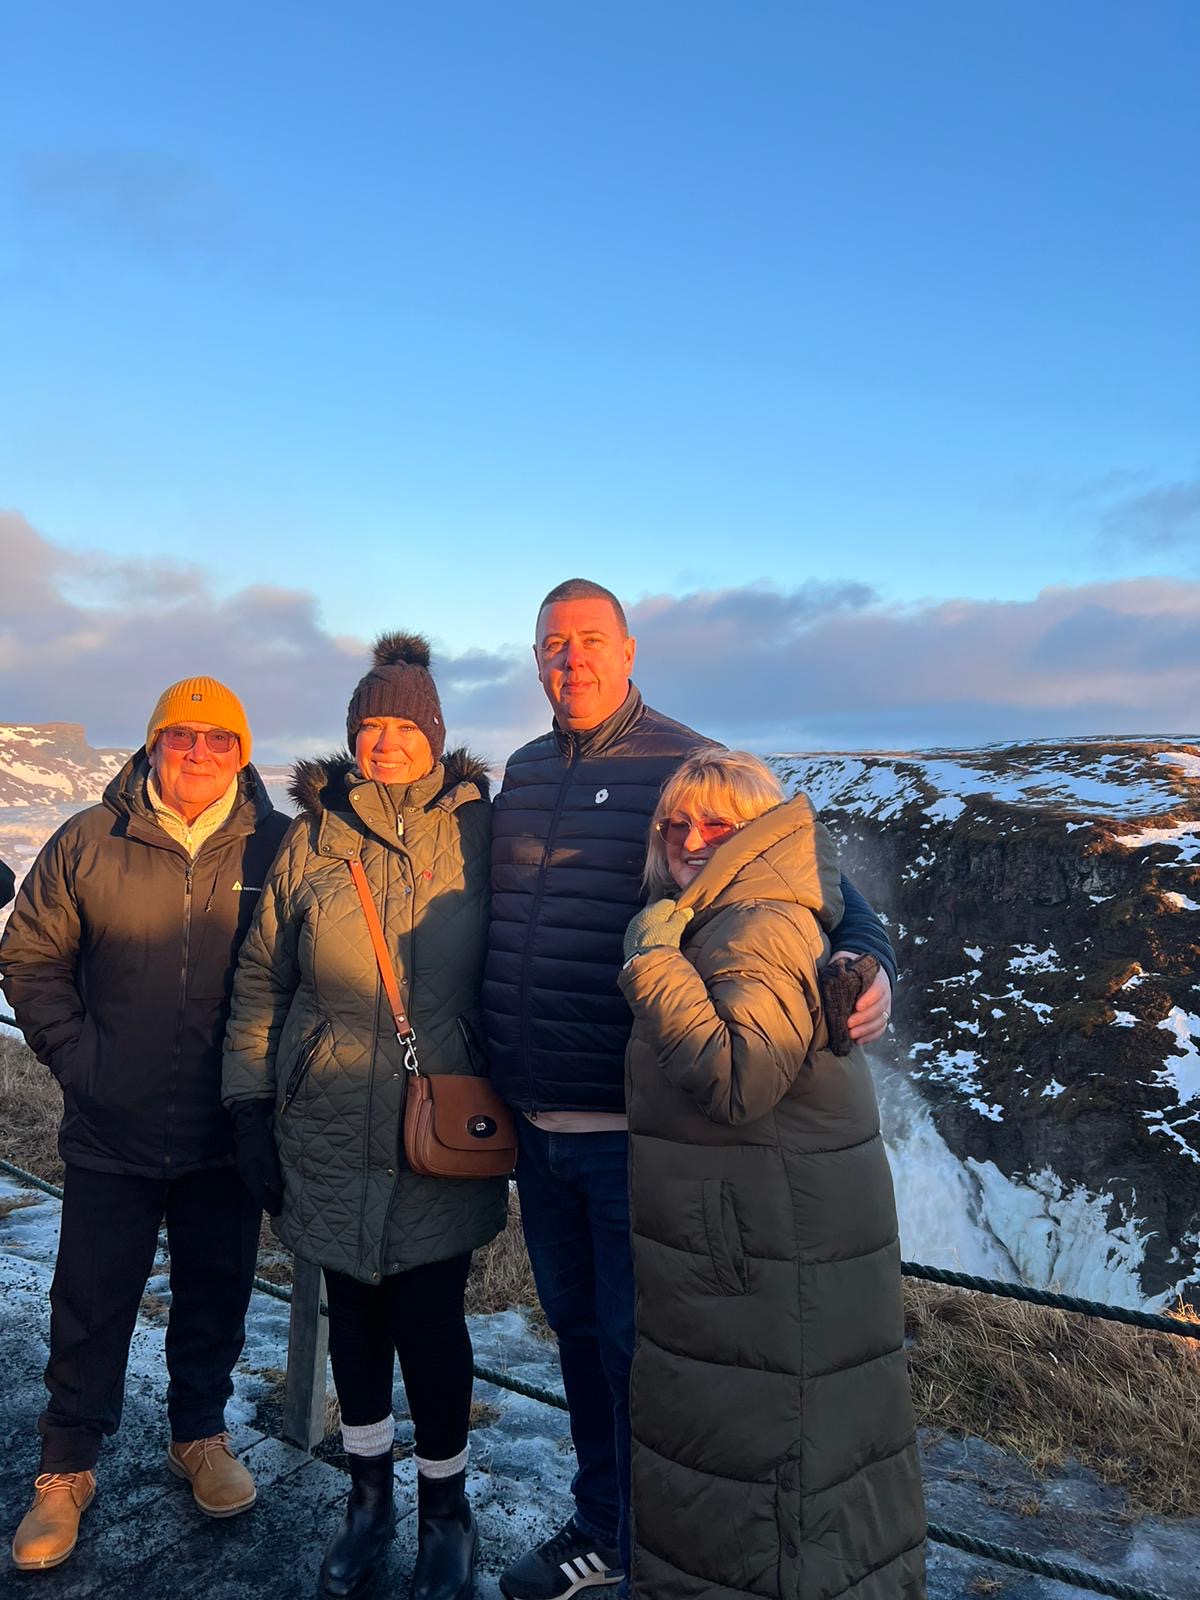 Lorraine and John Crawford with their relatives Michael and Faye Daltrey on their trip to Iceland